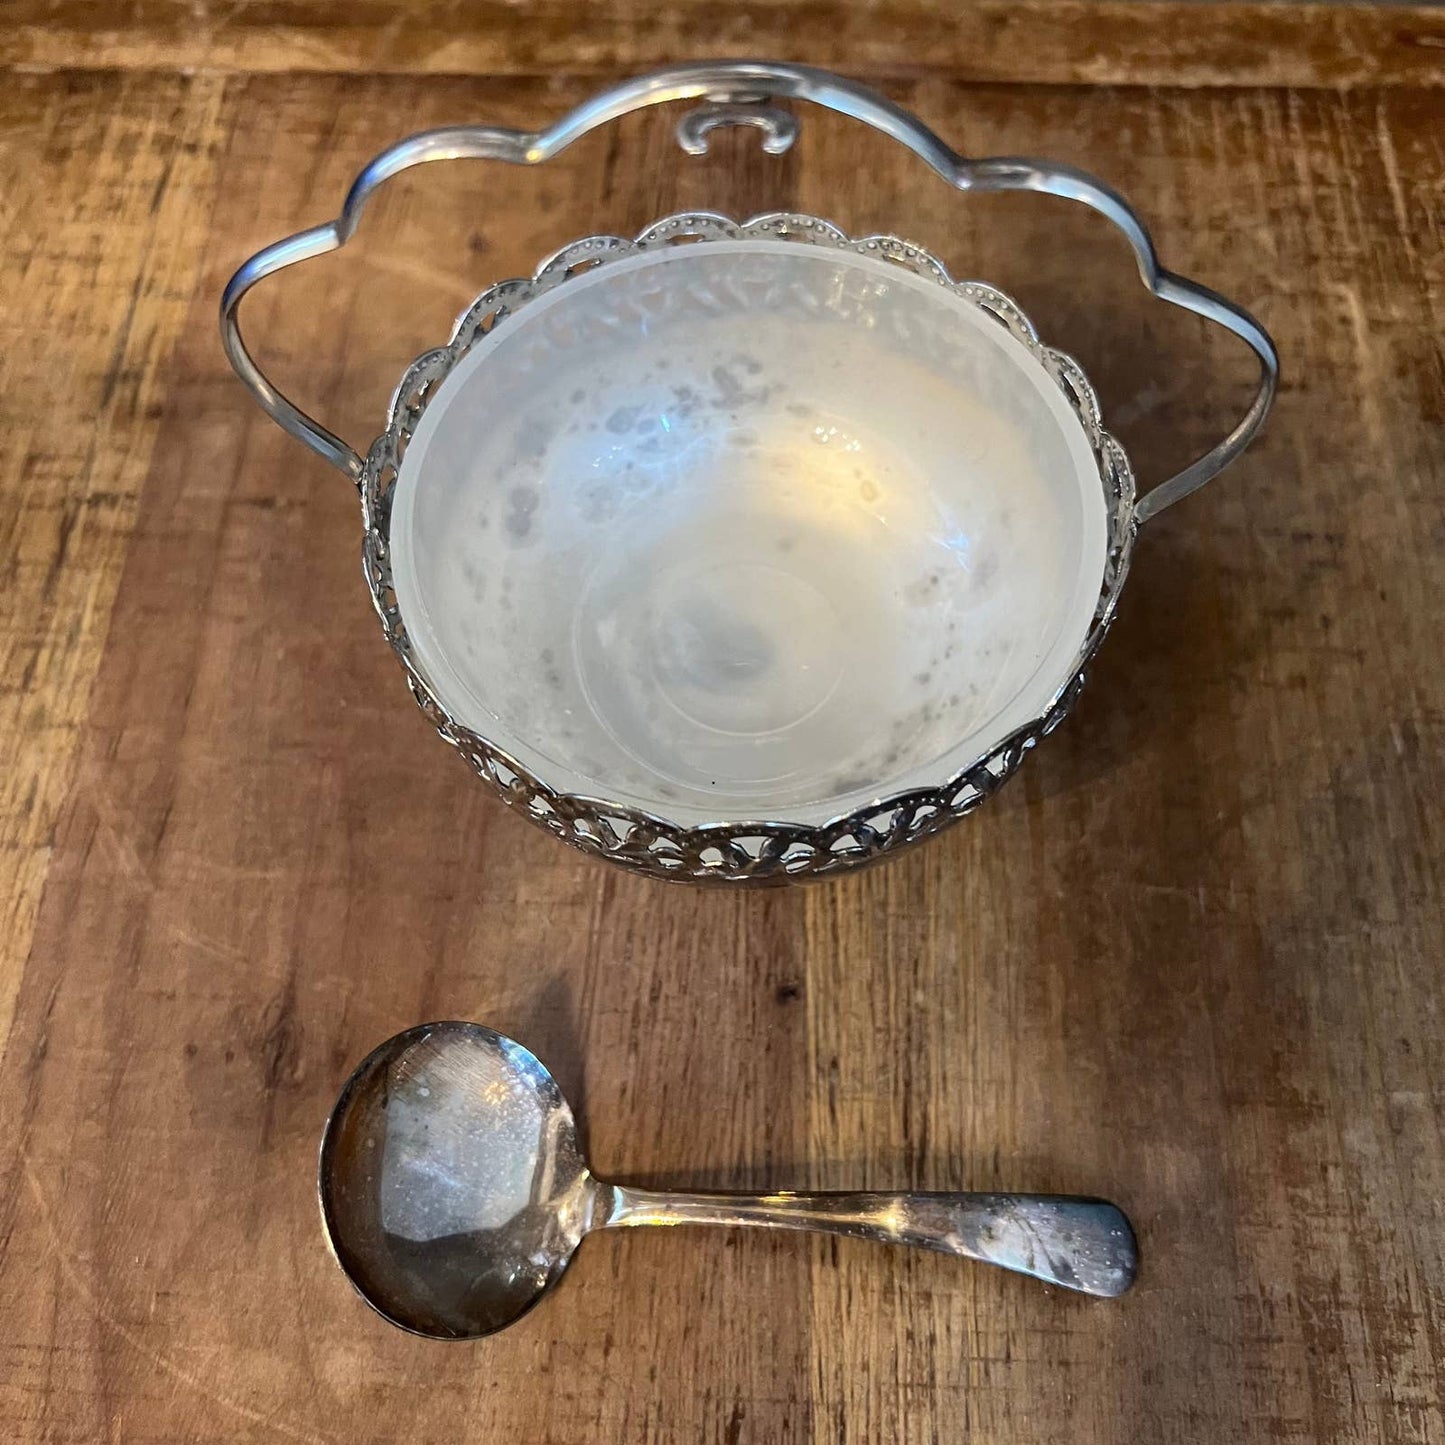 Vintage silver plated basket shaped footed sugar bowl with scalloped handle and spoon